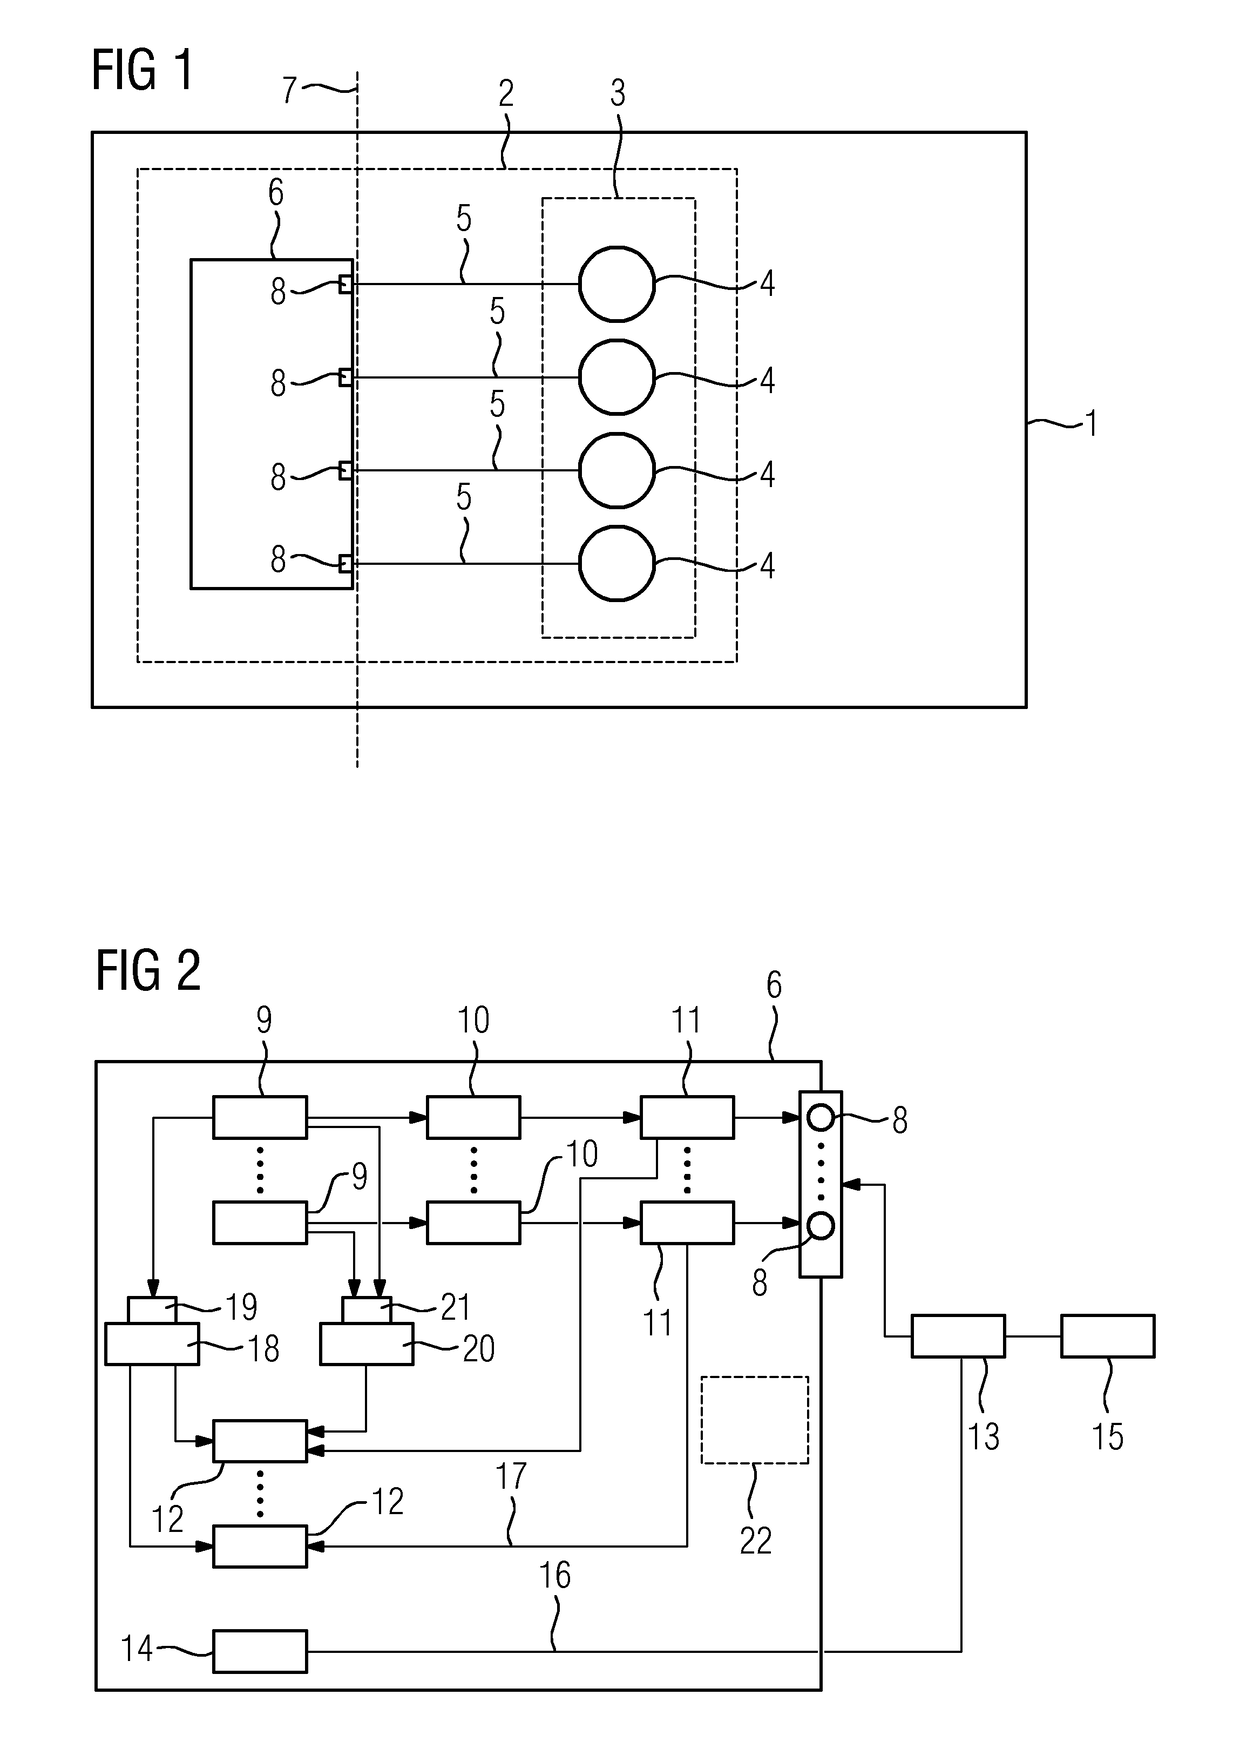 Operation of a transmission device of a magnetic resonance device